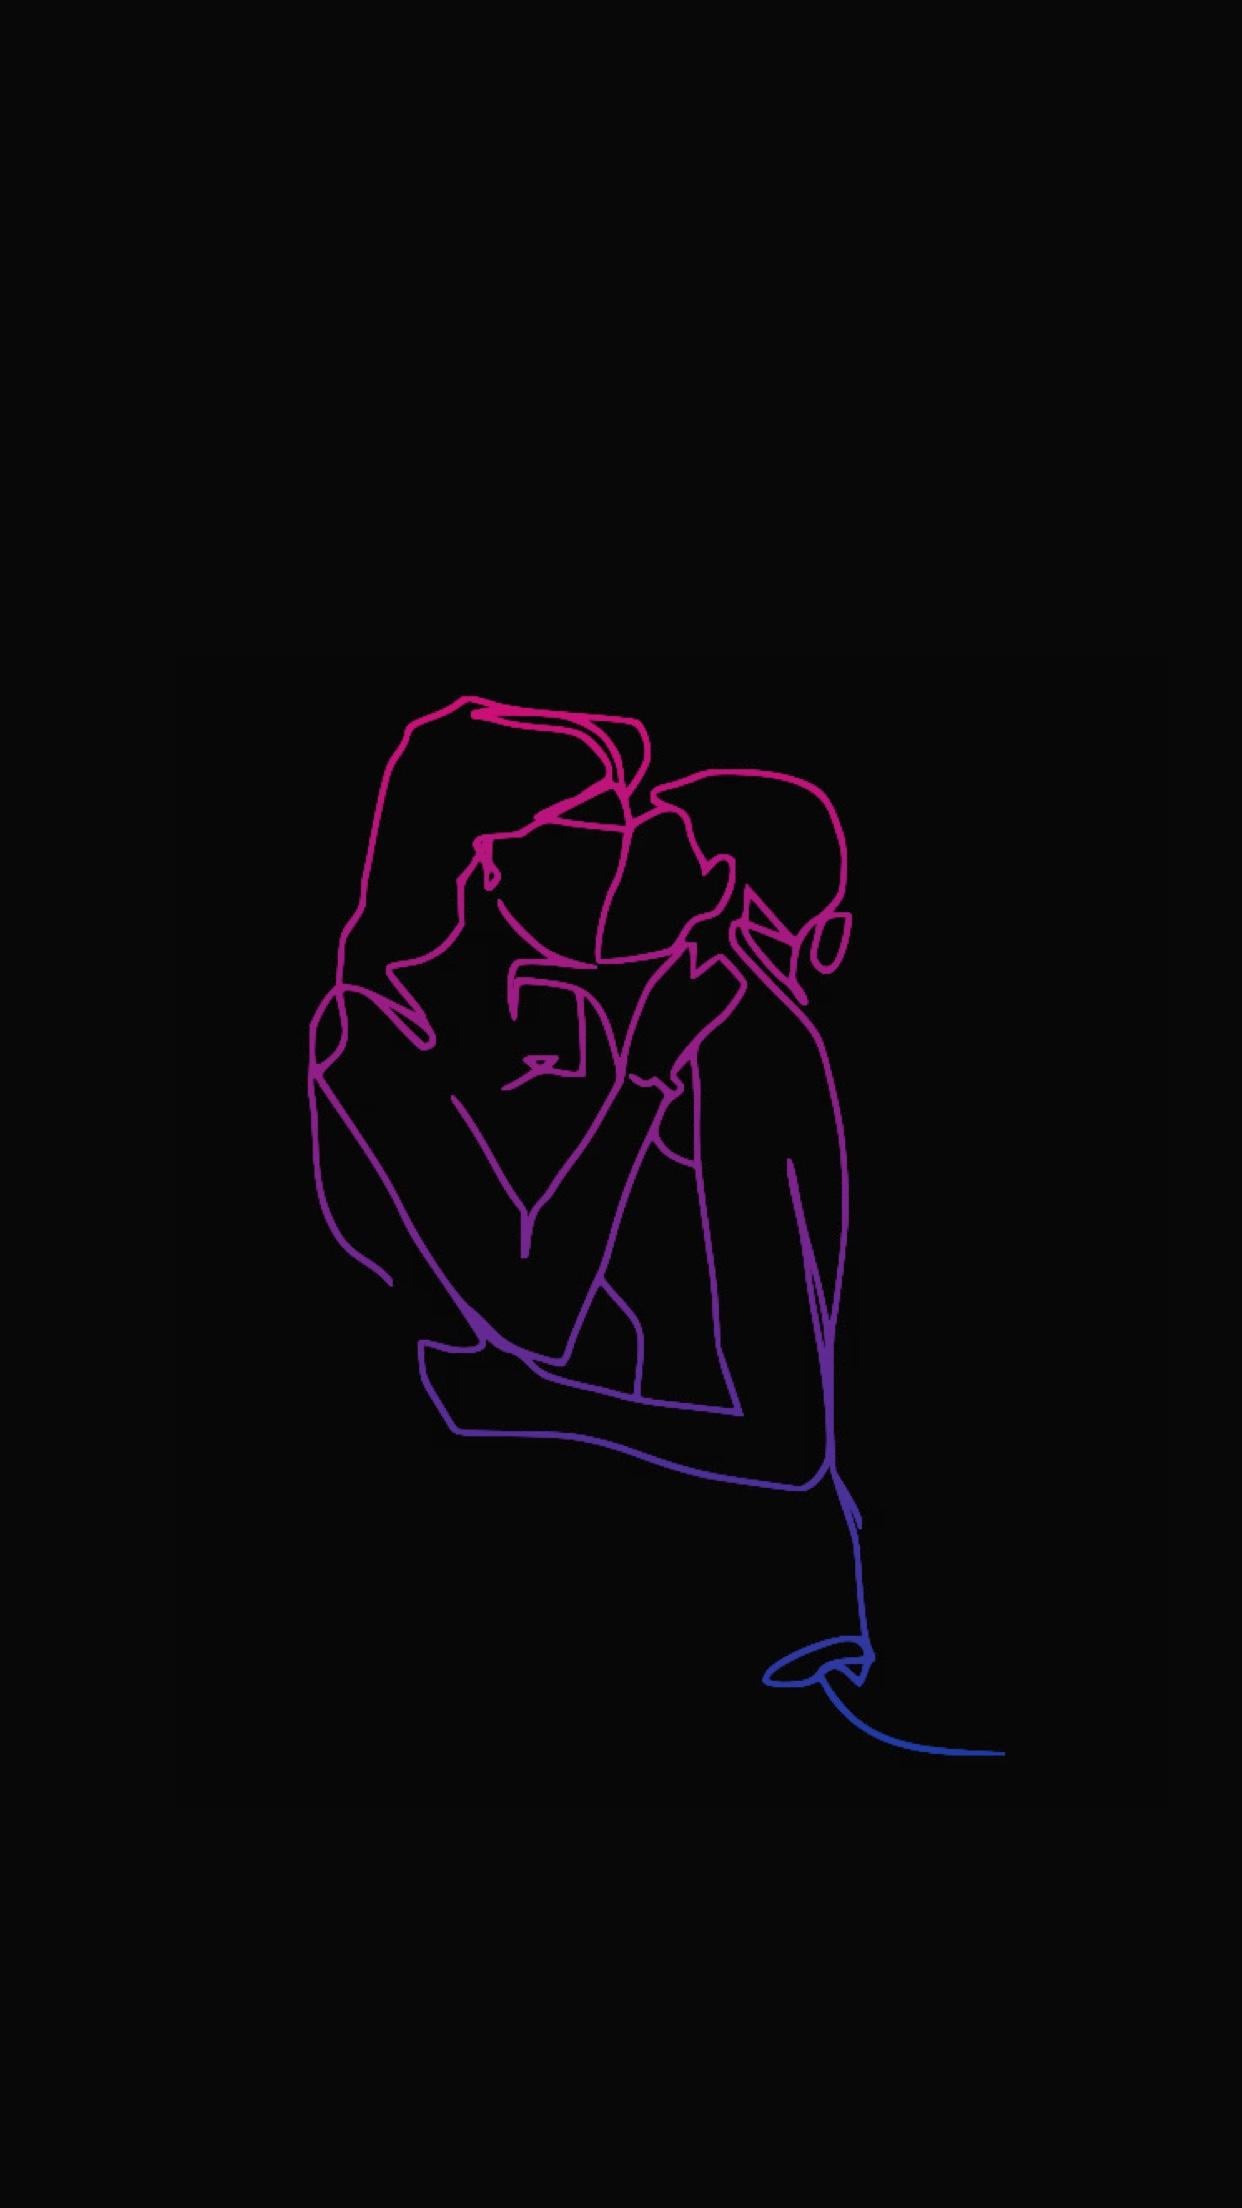 A man and a woman hugging in a dark room - Bisexual